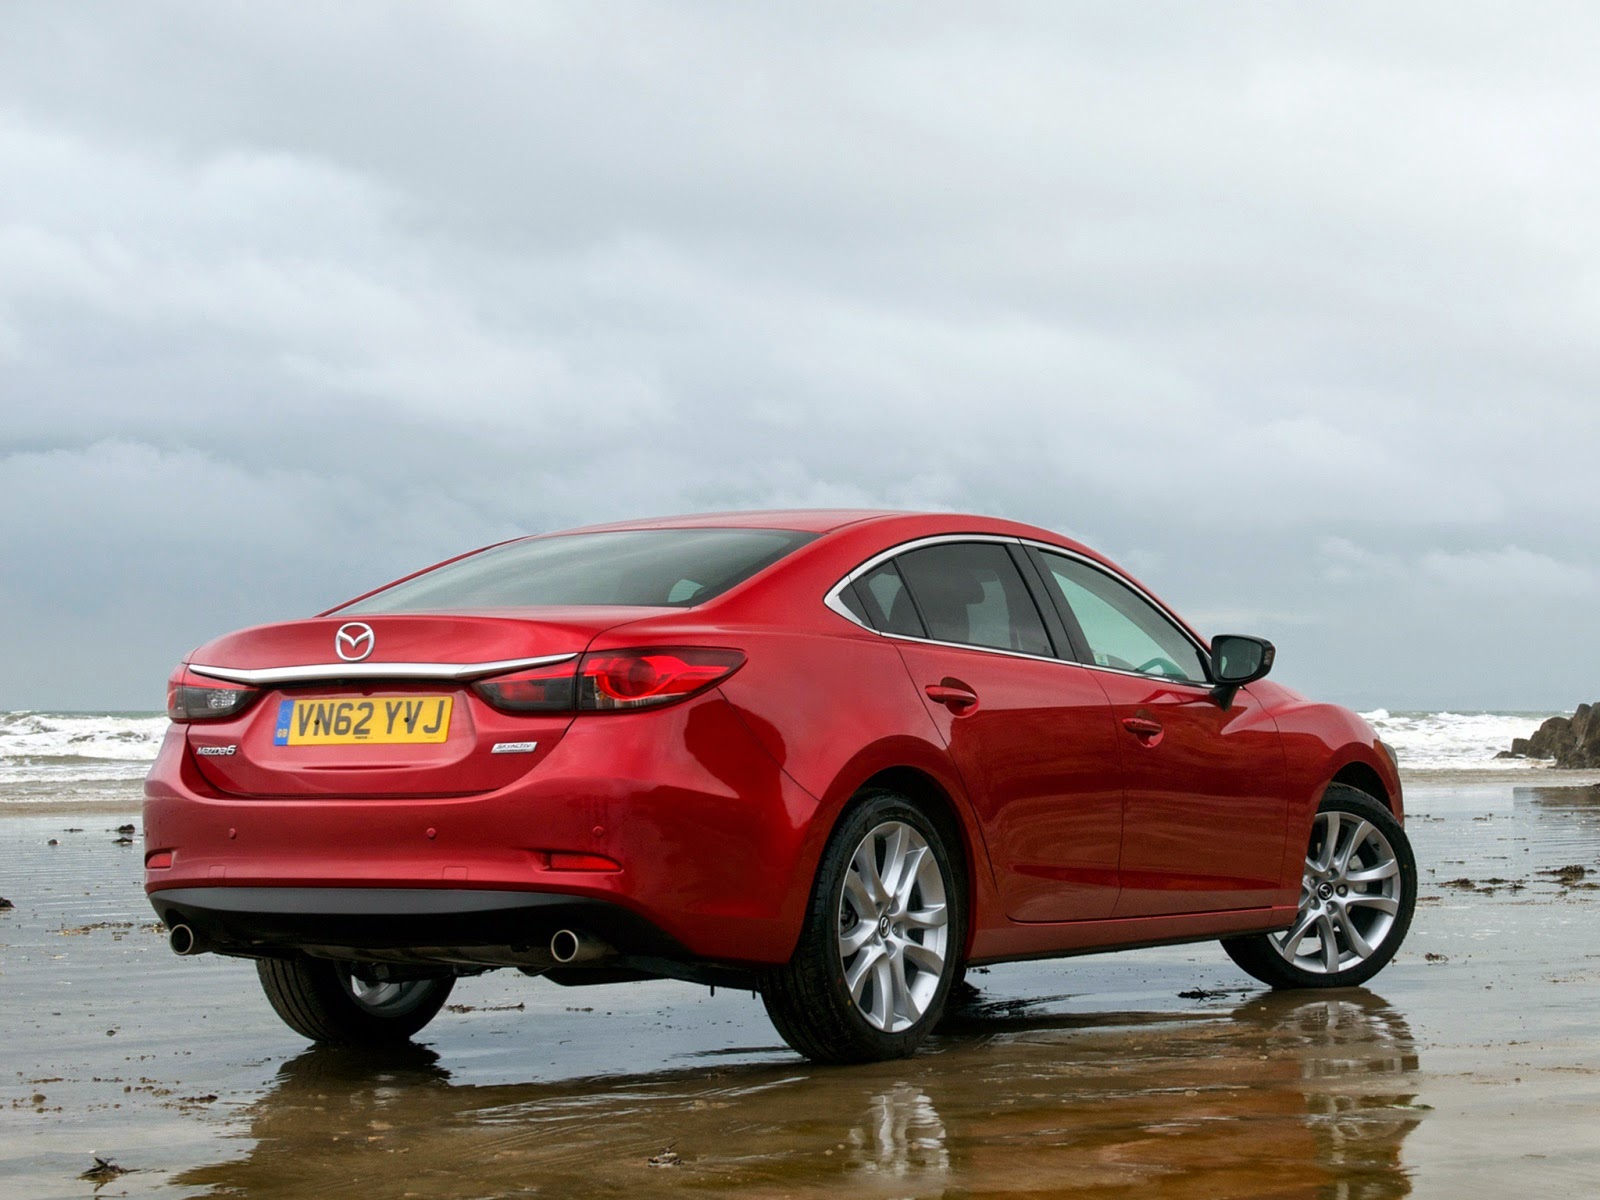 #26 3rd Gen Mazda 6 Saloon – Styled to stand out